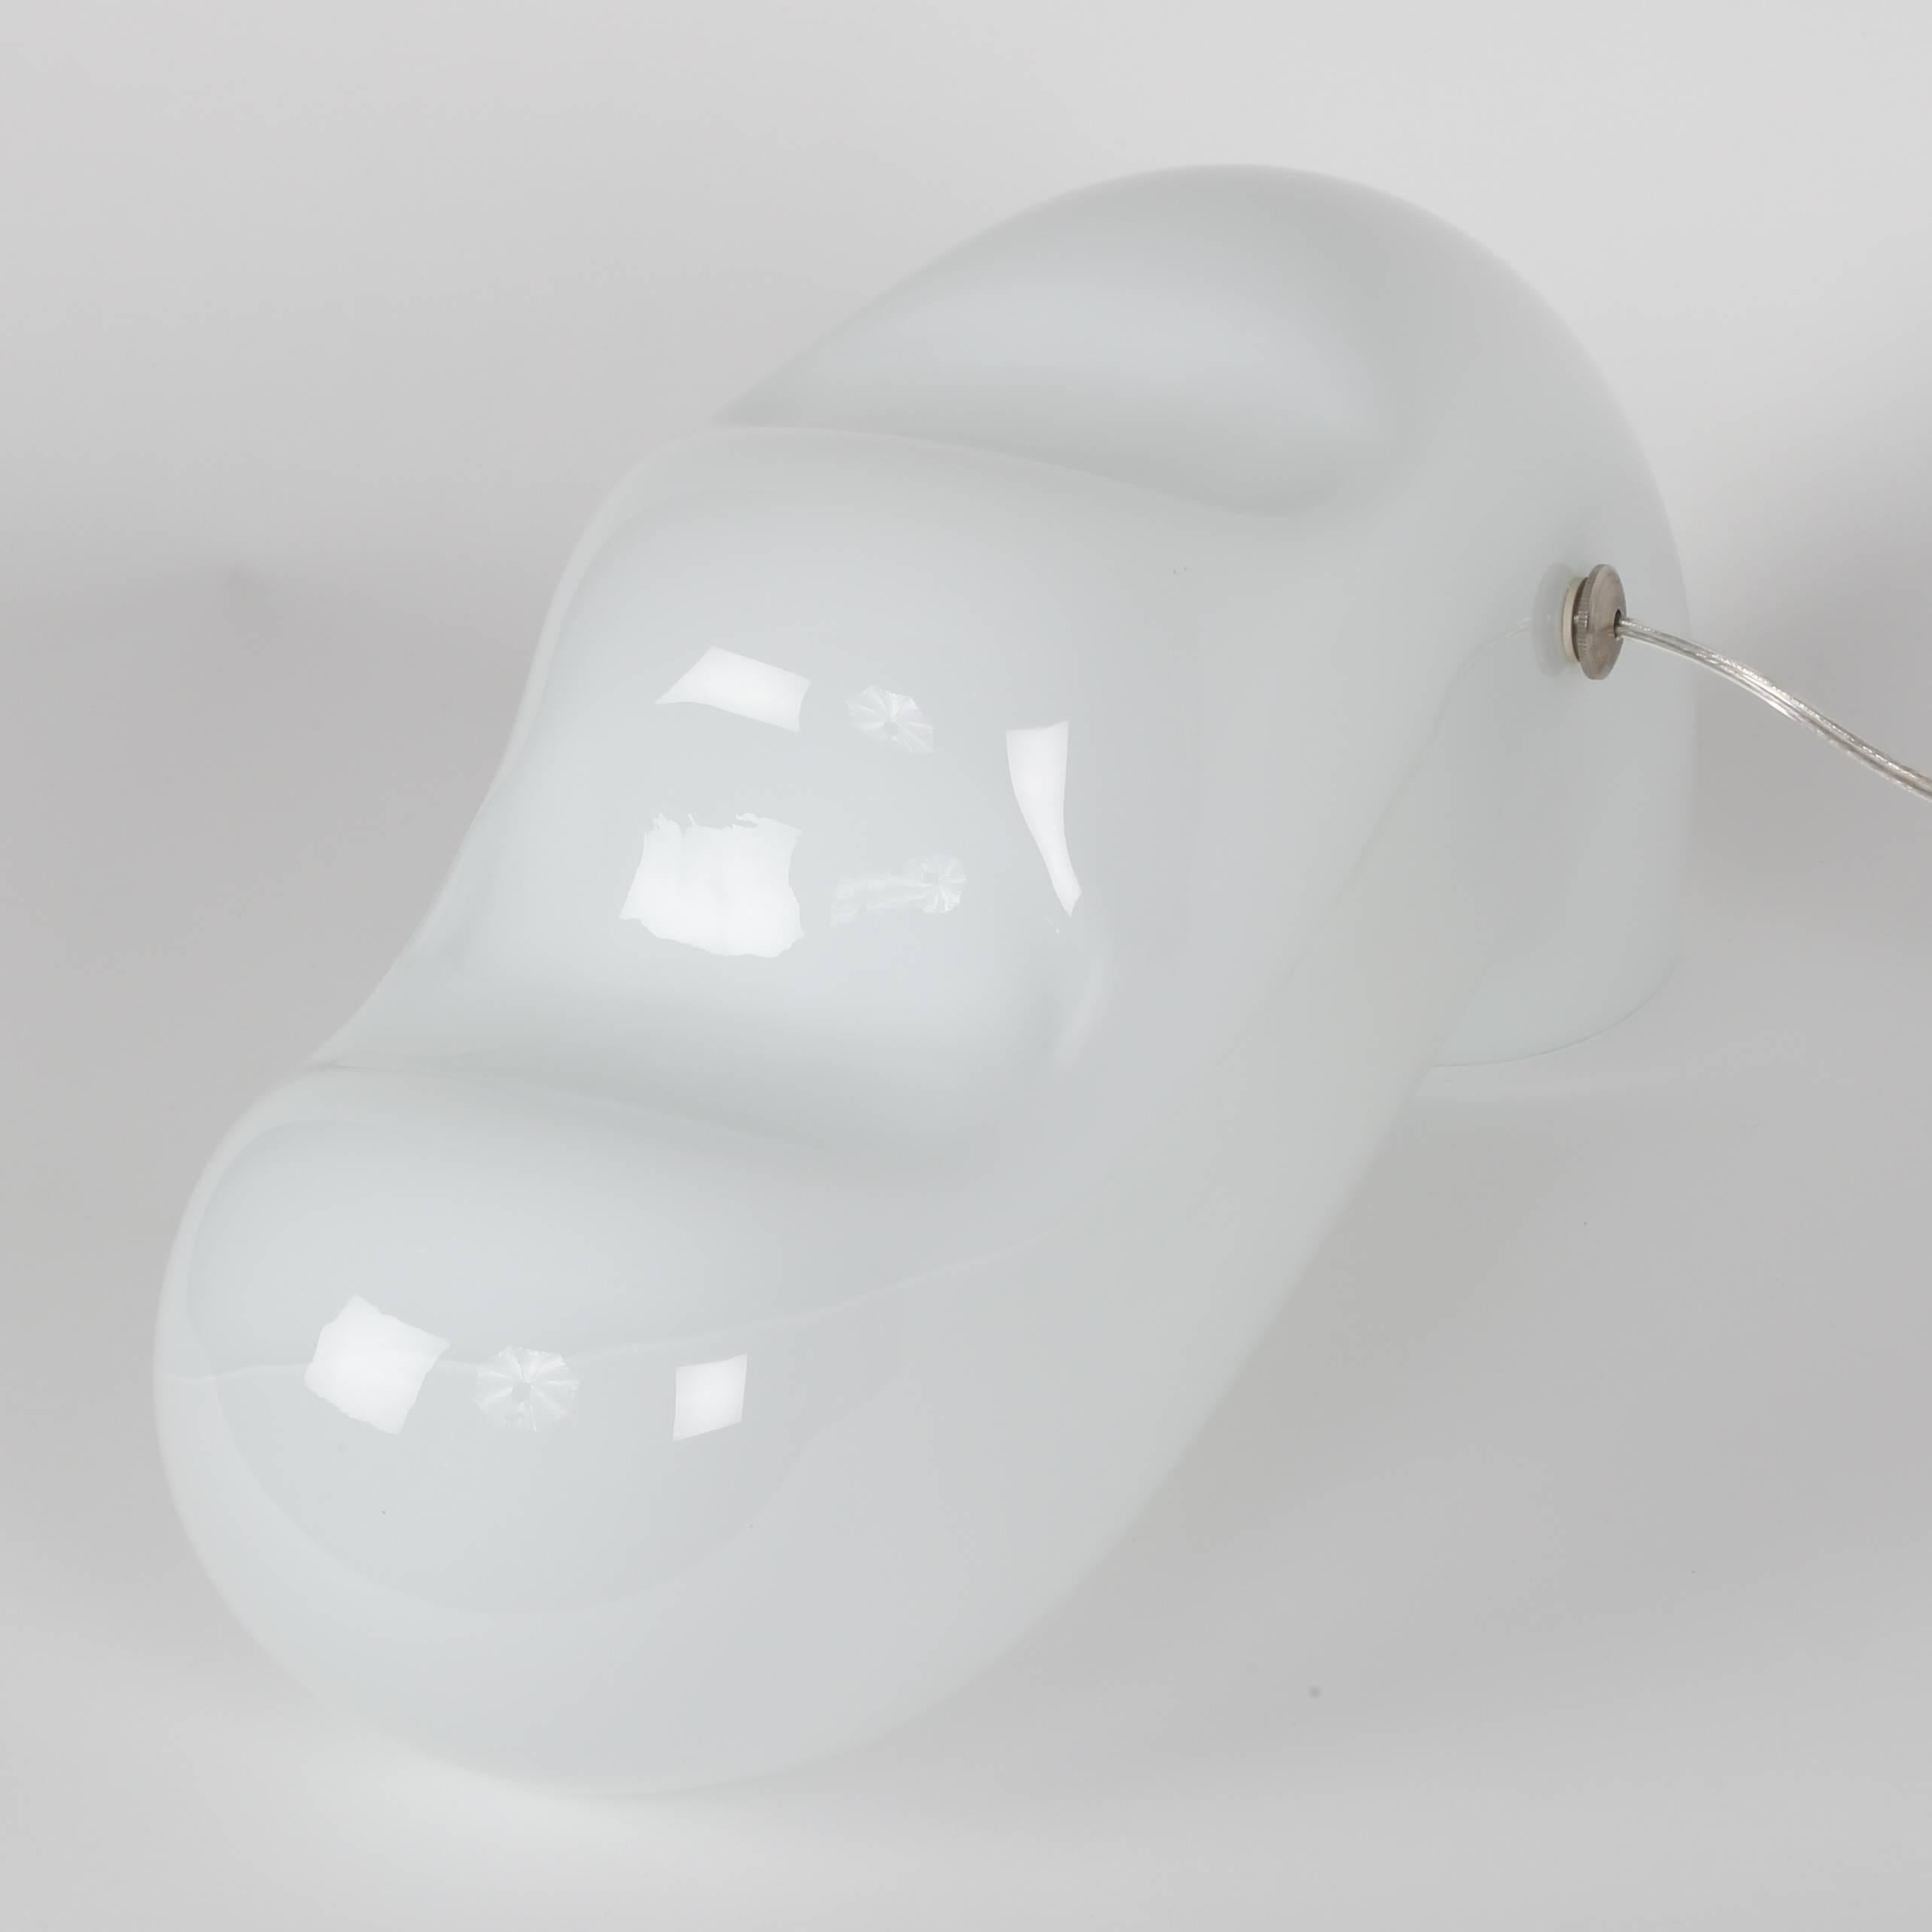 Gino Vistosi White and Gray Murano Glass Table Lamp, circa 1970s In Good Condition For Sale In Brooklyn, NY